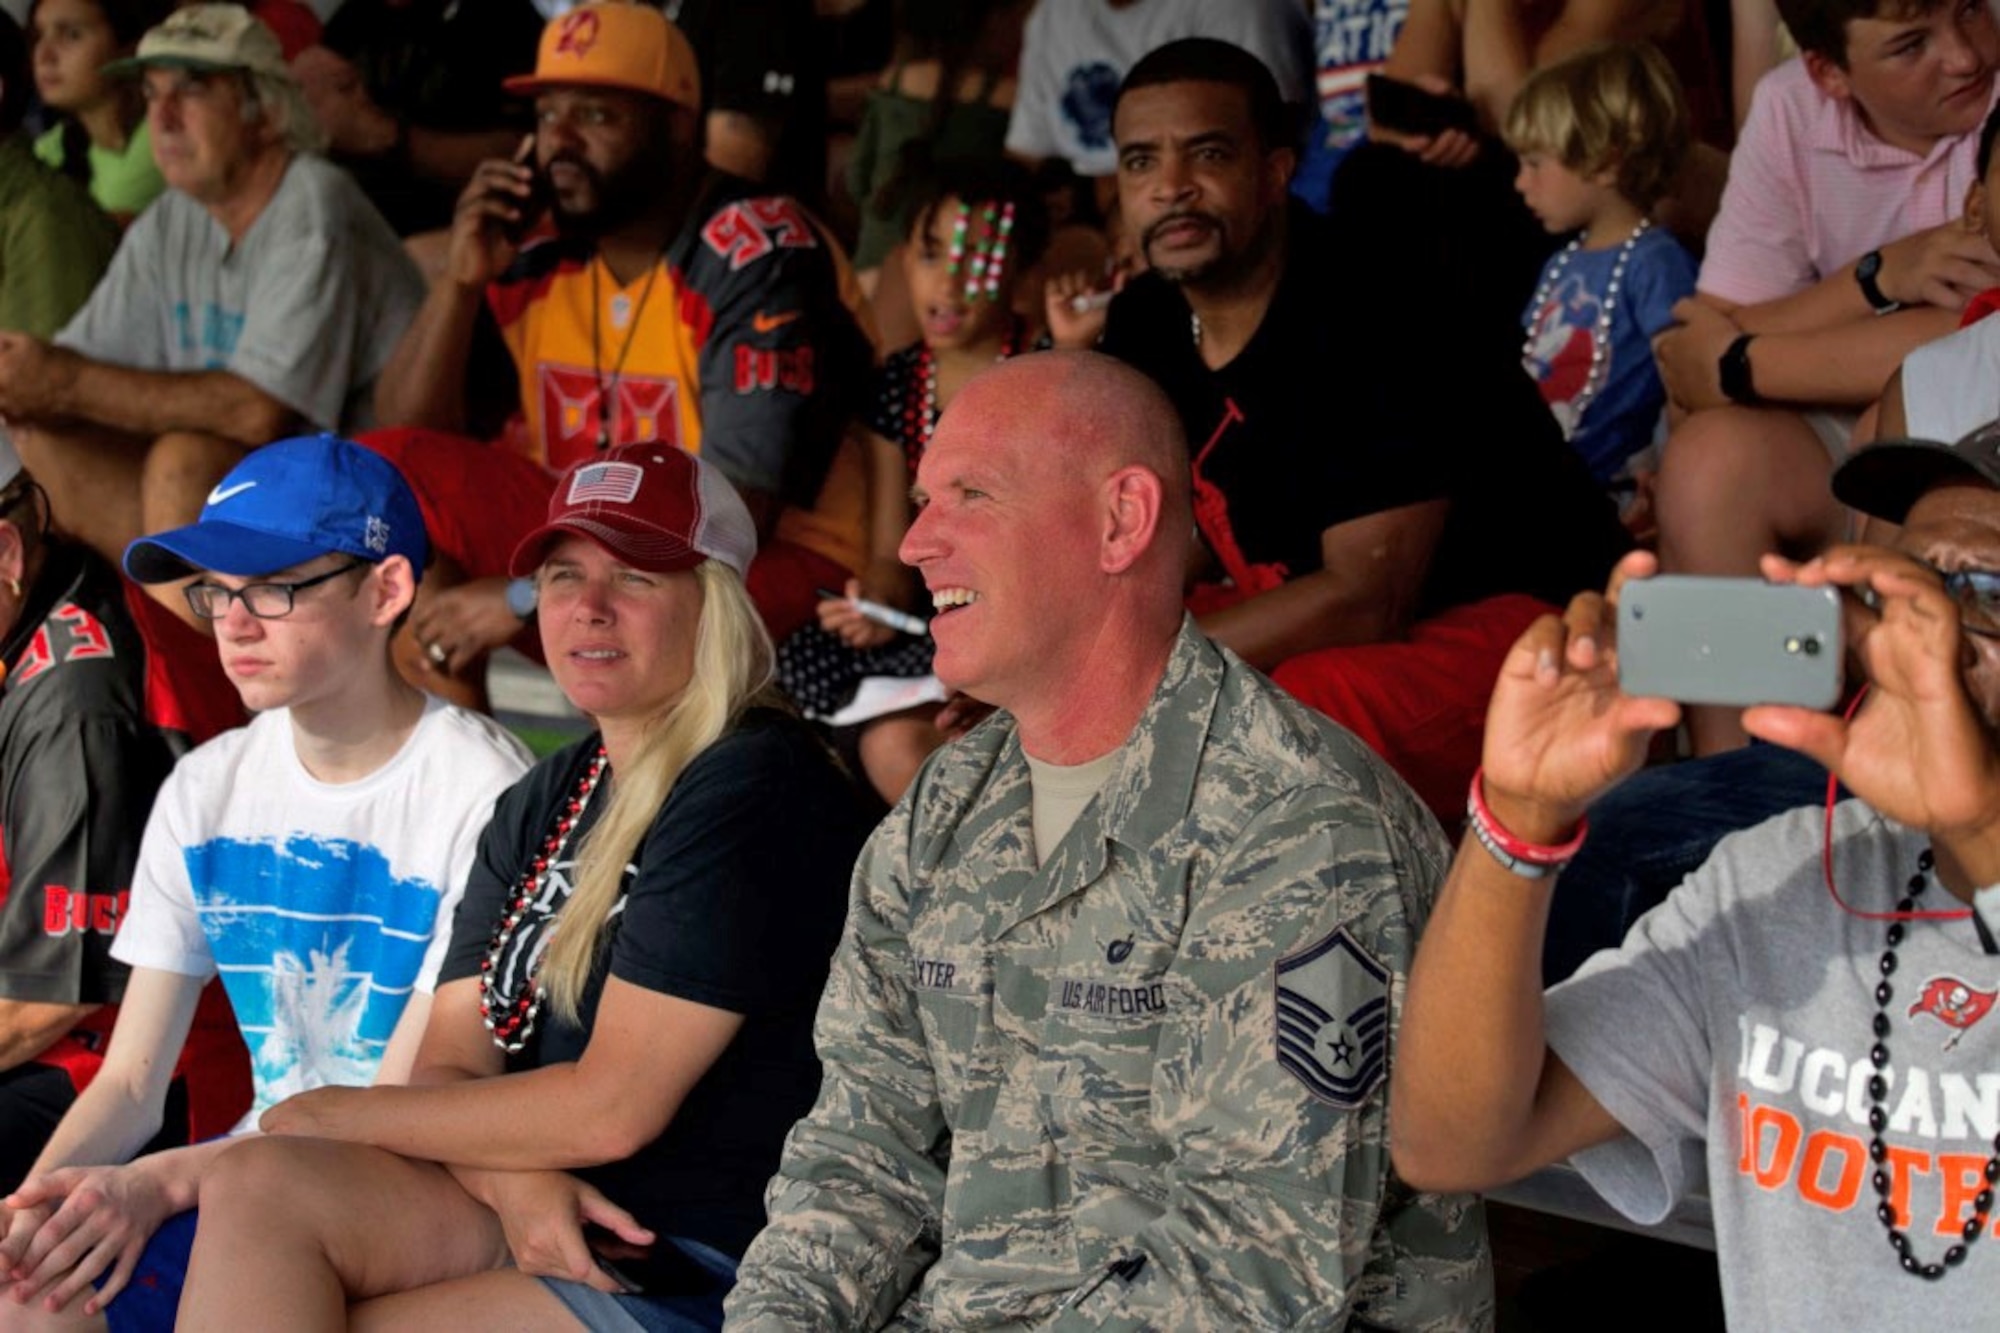 Service members and families sit along the sidelines to watch the Tampa Bay Buccaneers Training Camp on August 5 at the AdventHealth Training Center in Tampa. Every year the Tampa Bay Buccaneers have a Military-Day Training Camp for all military, retired or veteran service members and dependents. (U.S. Air Force photo by Senior Airman Alexis Suarez) 190805-F-CG206-0023